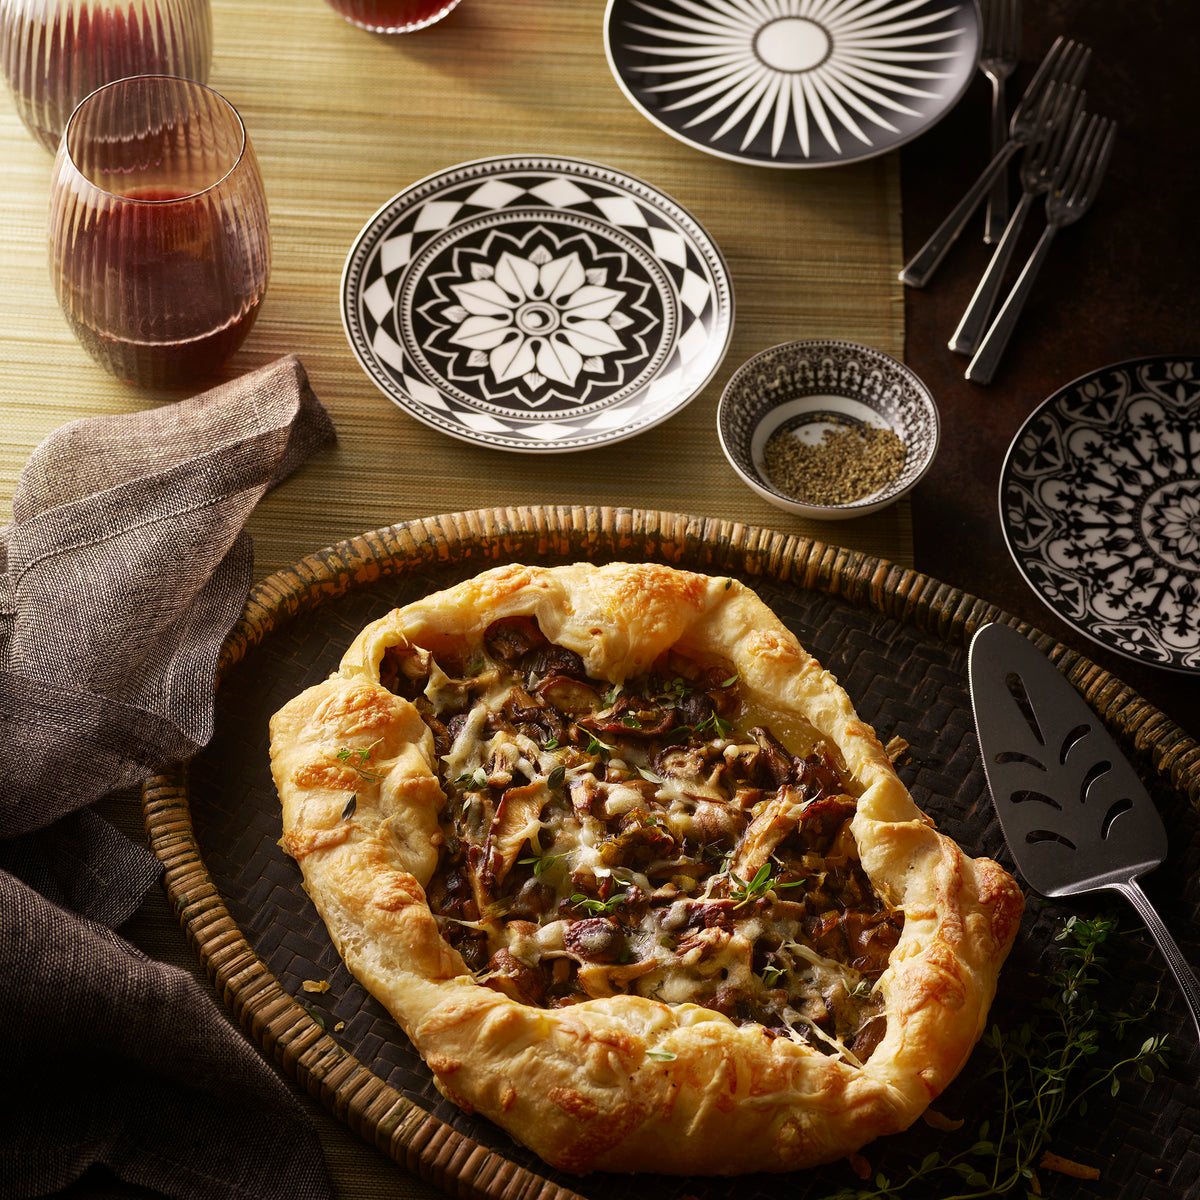 Mushroom Galette with Fez, Marrakech and Casablanca Canape Plates from Caskata